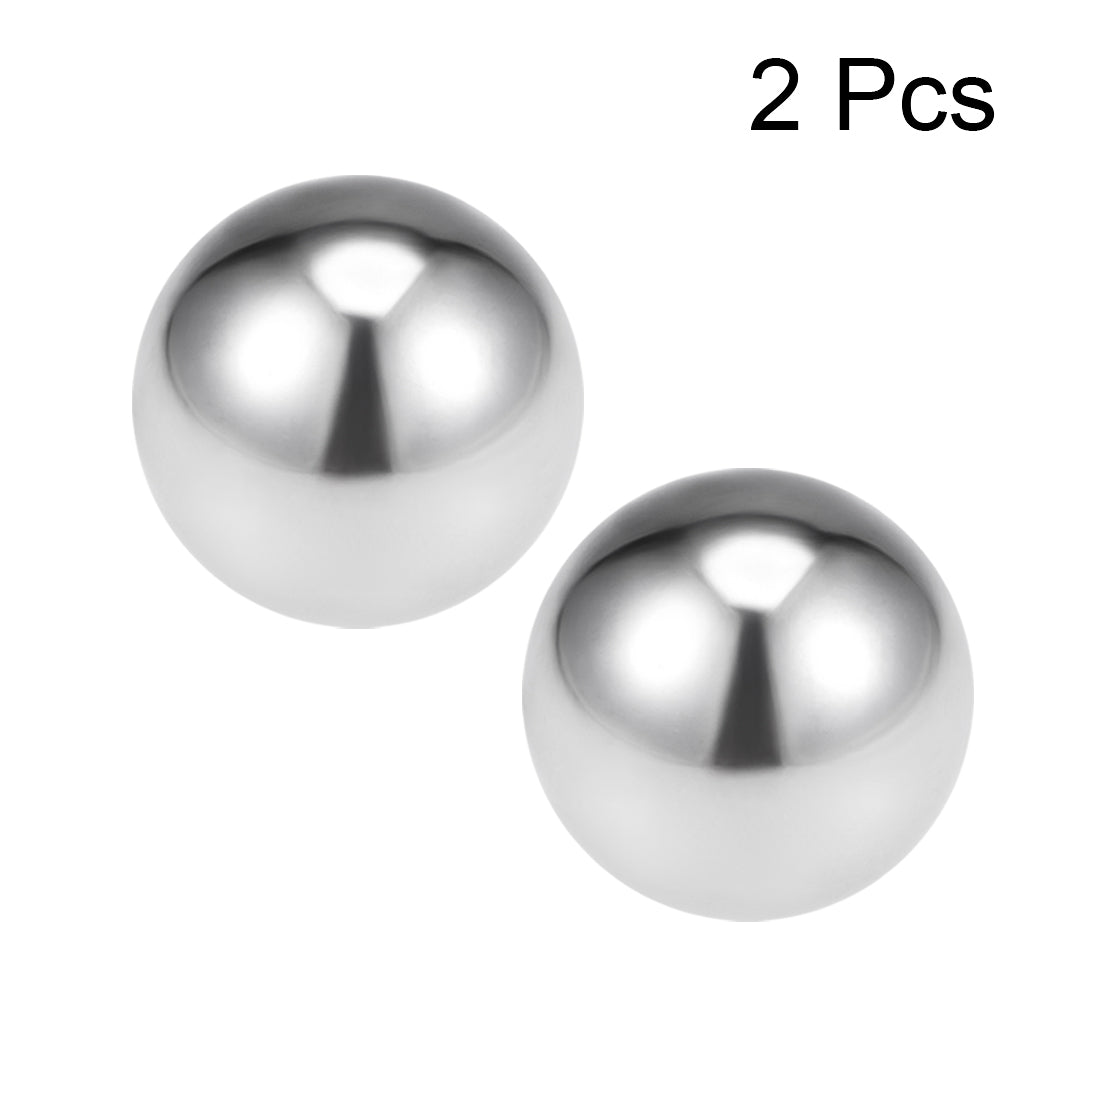 Uxcell Uxcell 14mm Bearing Balls 304 Stainless Steel G100 Precision Balls 2pcs